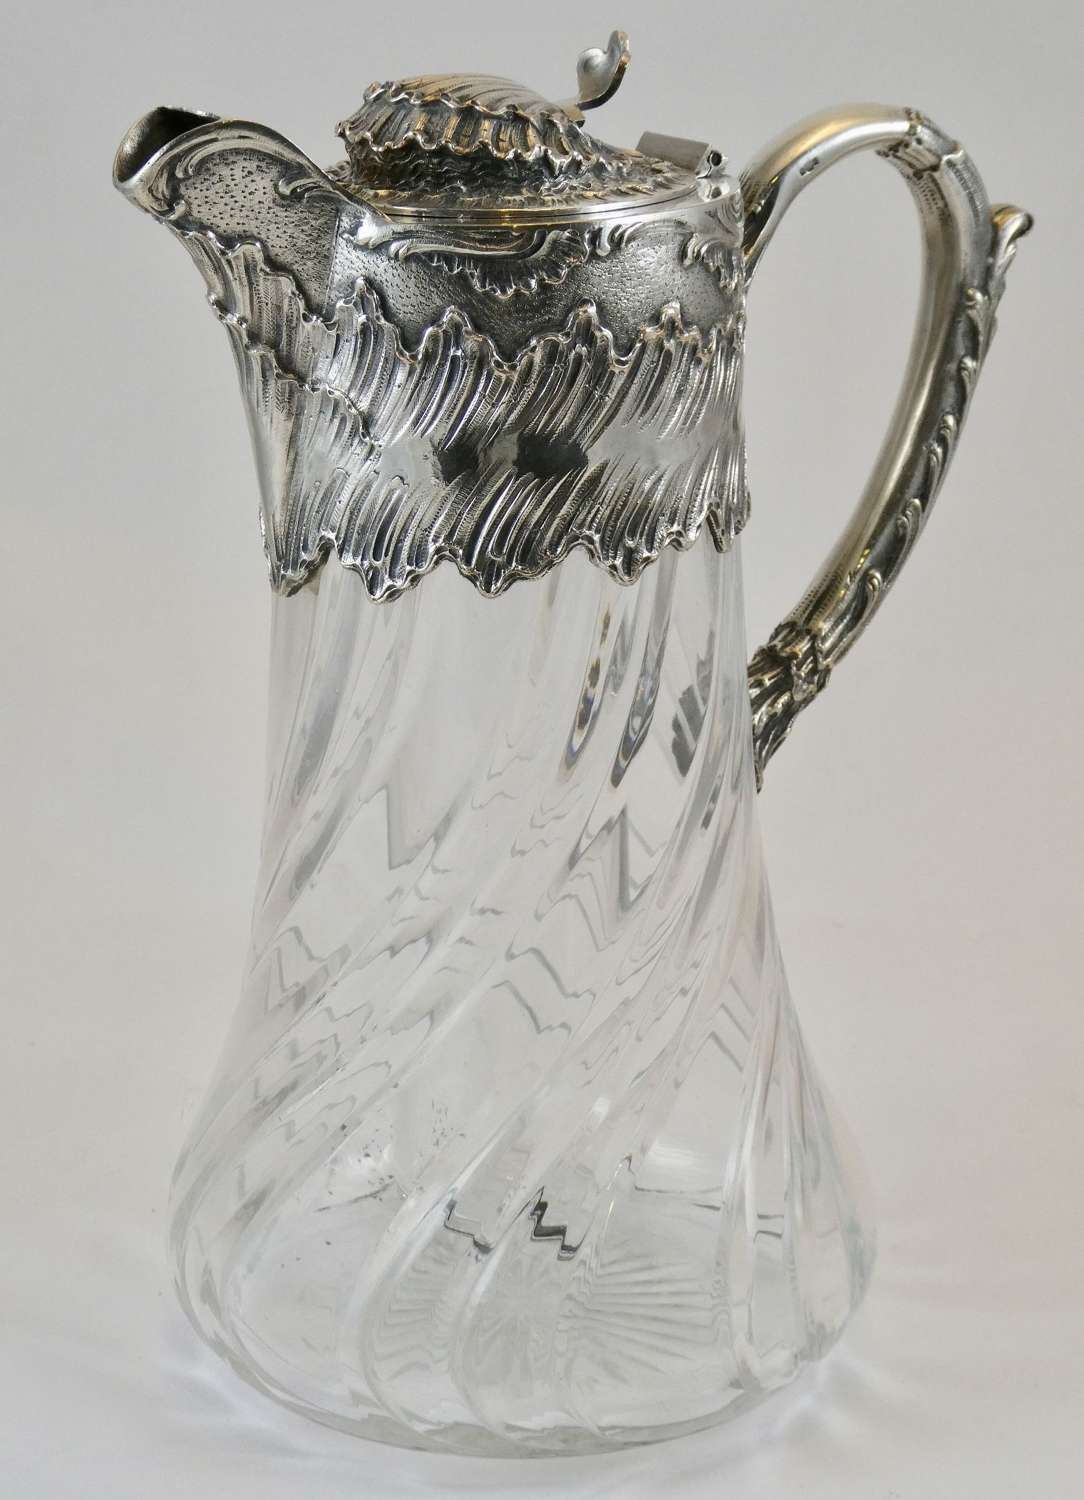 Silver Plate and Glass Lemonade Jug, late 19th century